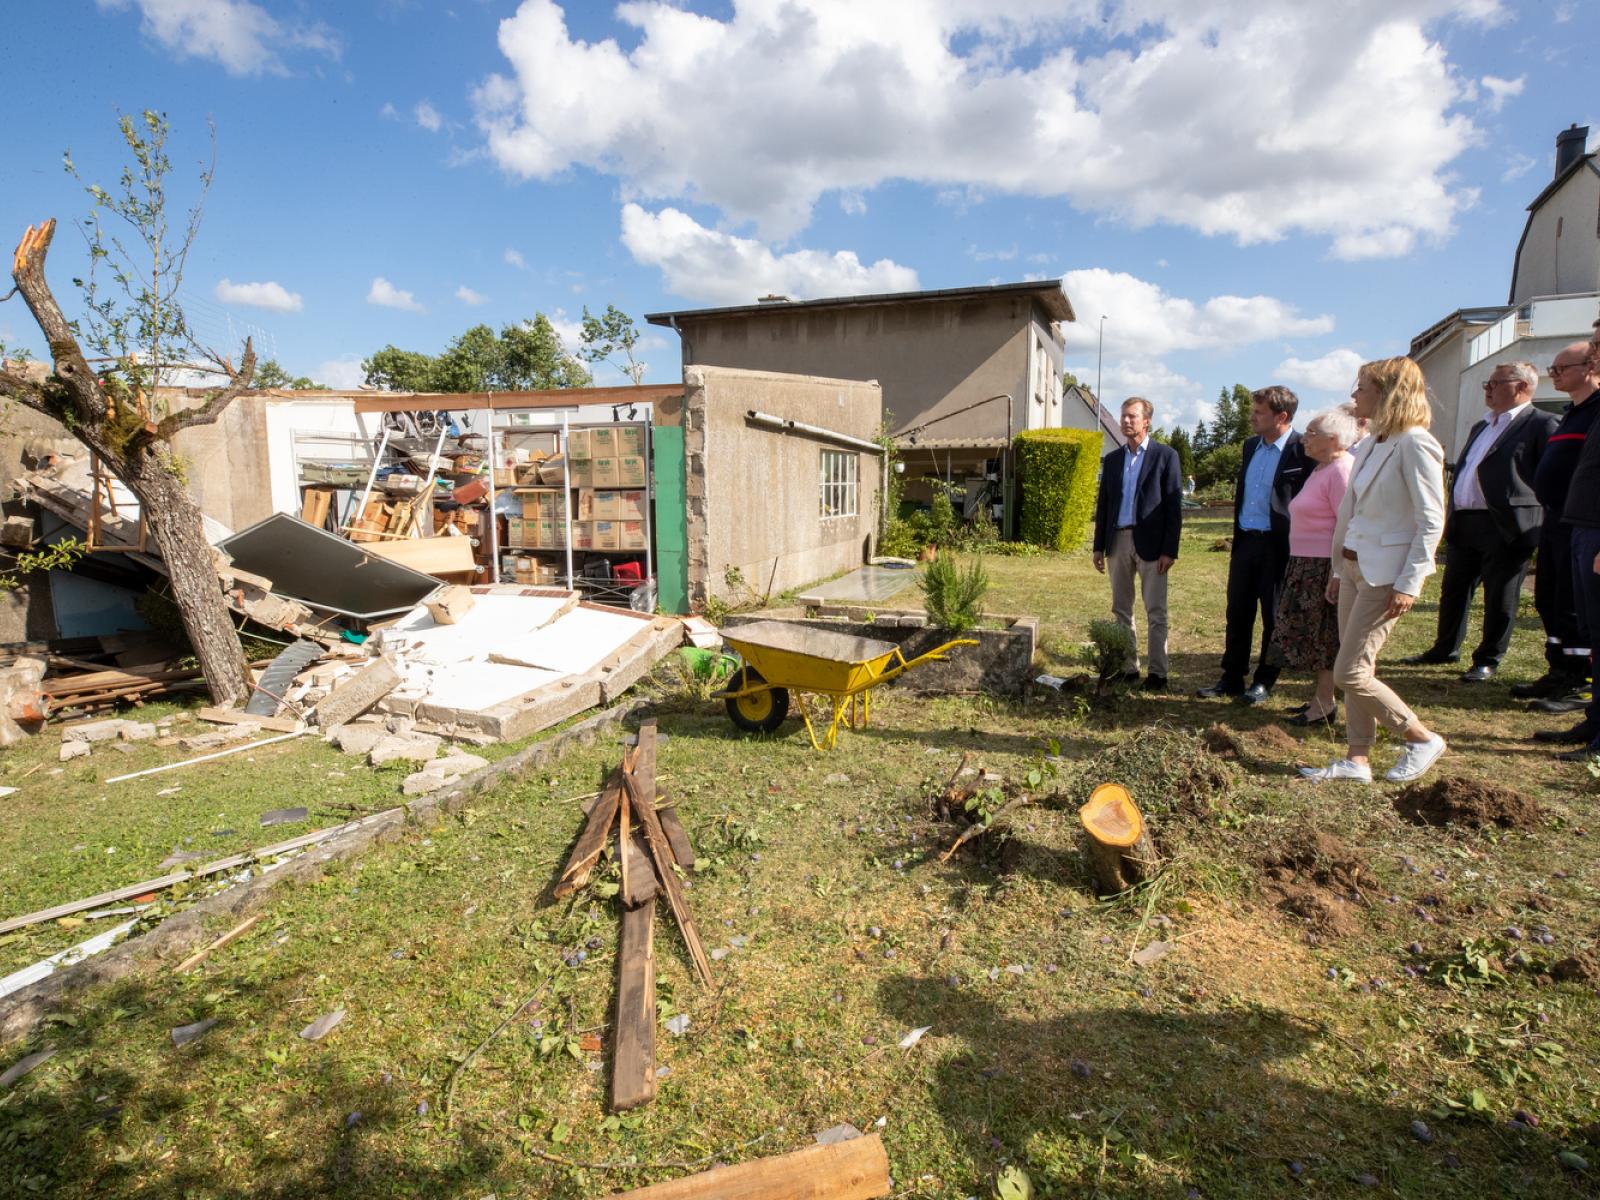 2019: Grand Duke and members of the government on the ground with tornado victims